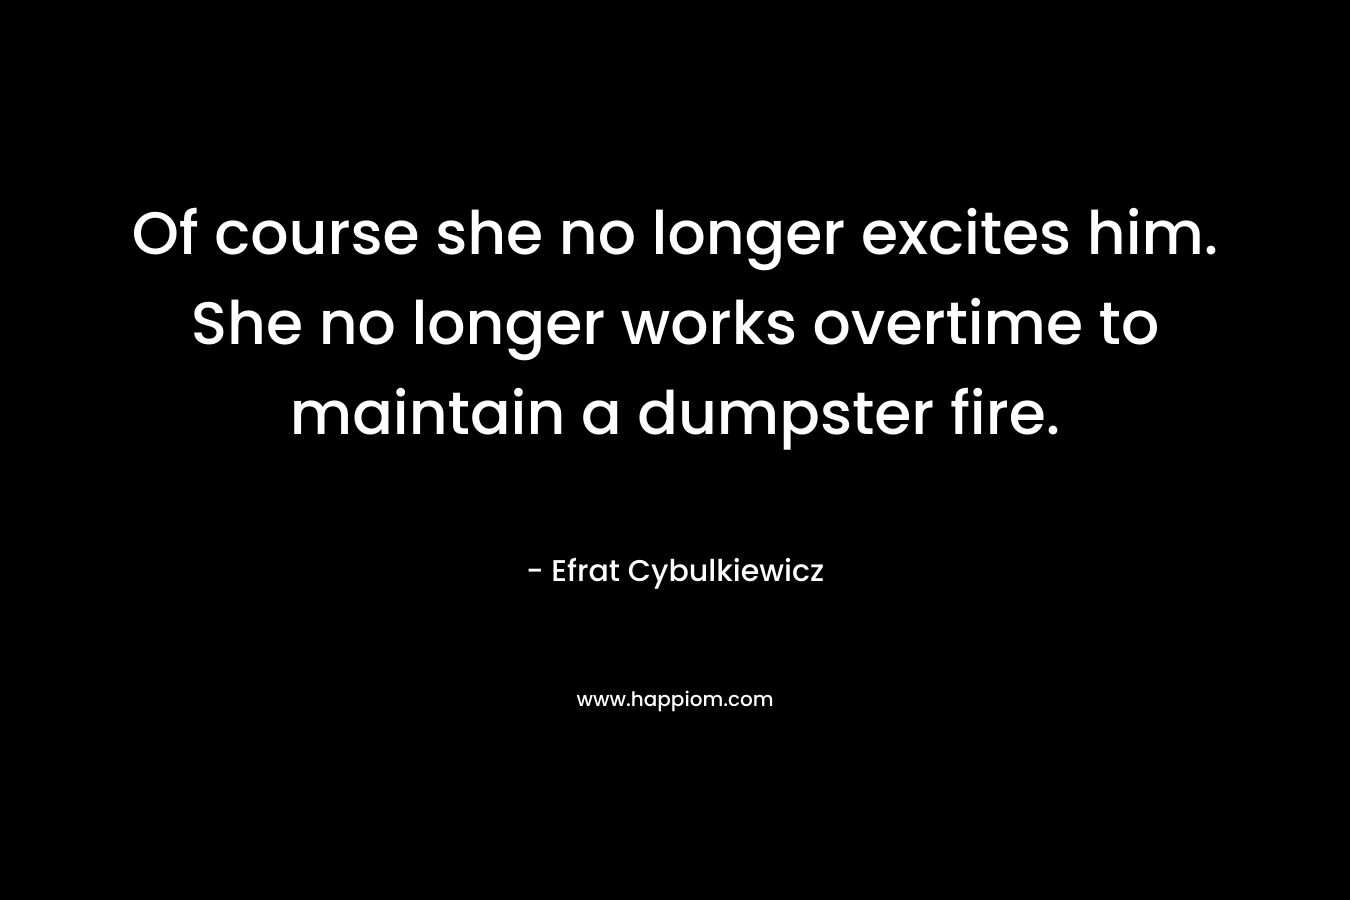 Of course she no longer excites him. She no longer works overtime to maintain a dumpster fire.